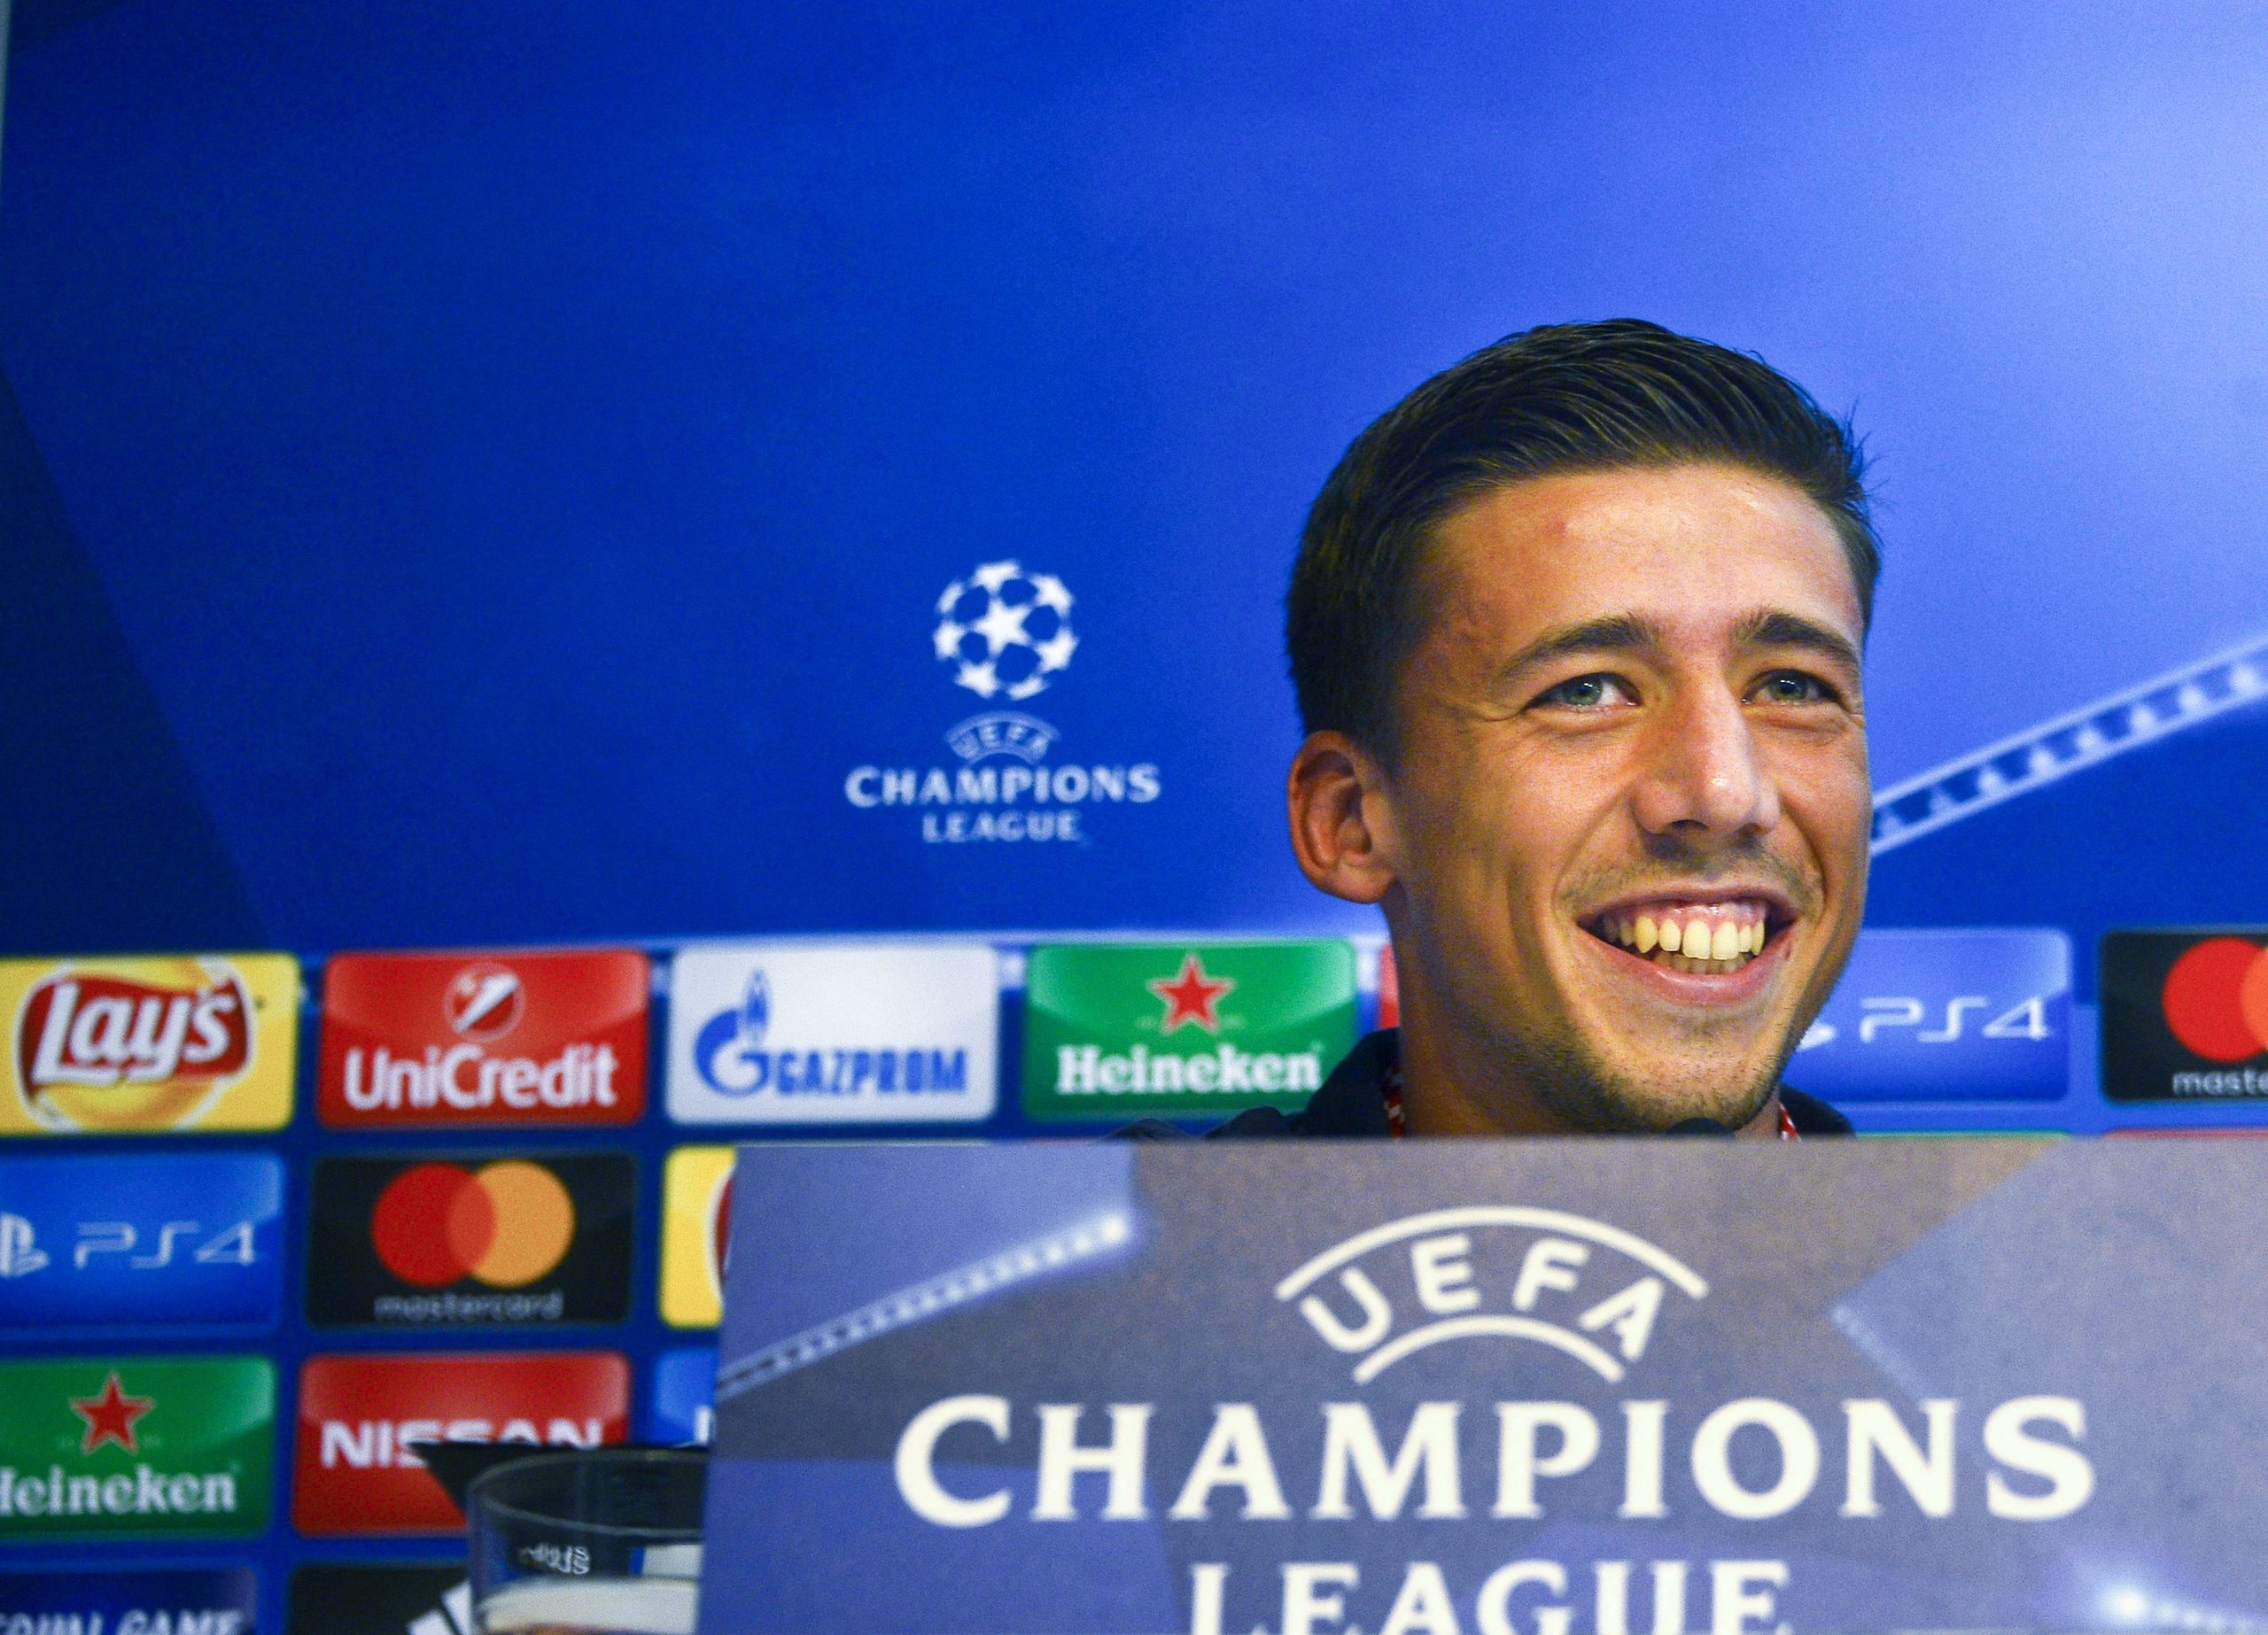 Clement Lenglet explains what Tottenham Hotspur need to do to qualify for the Champions League knockouts.